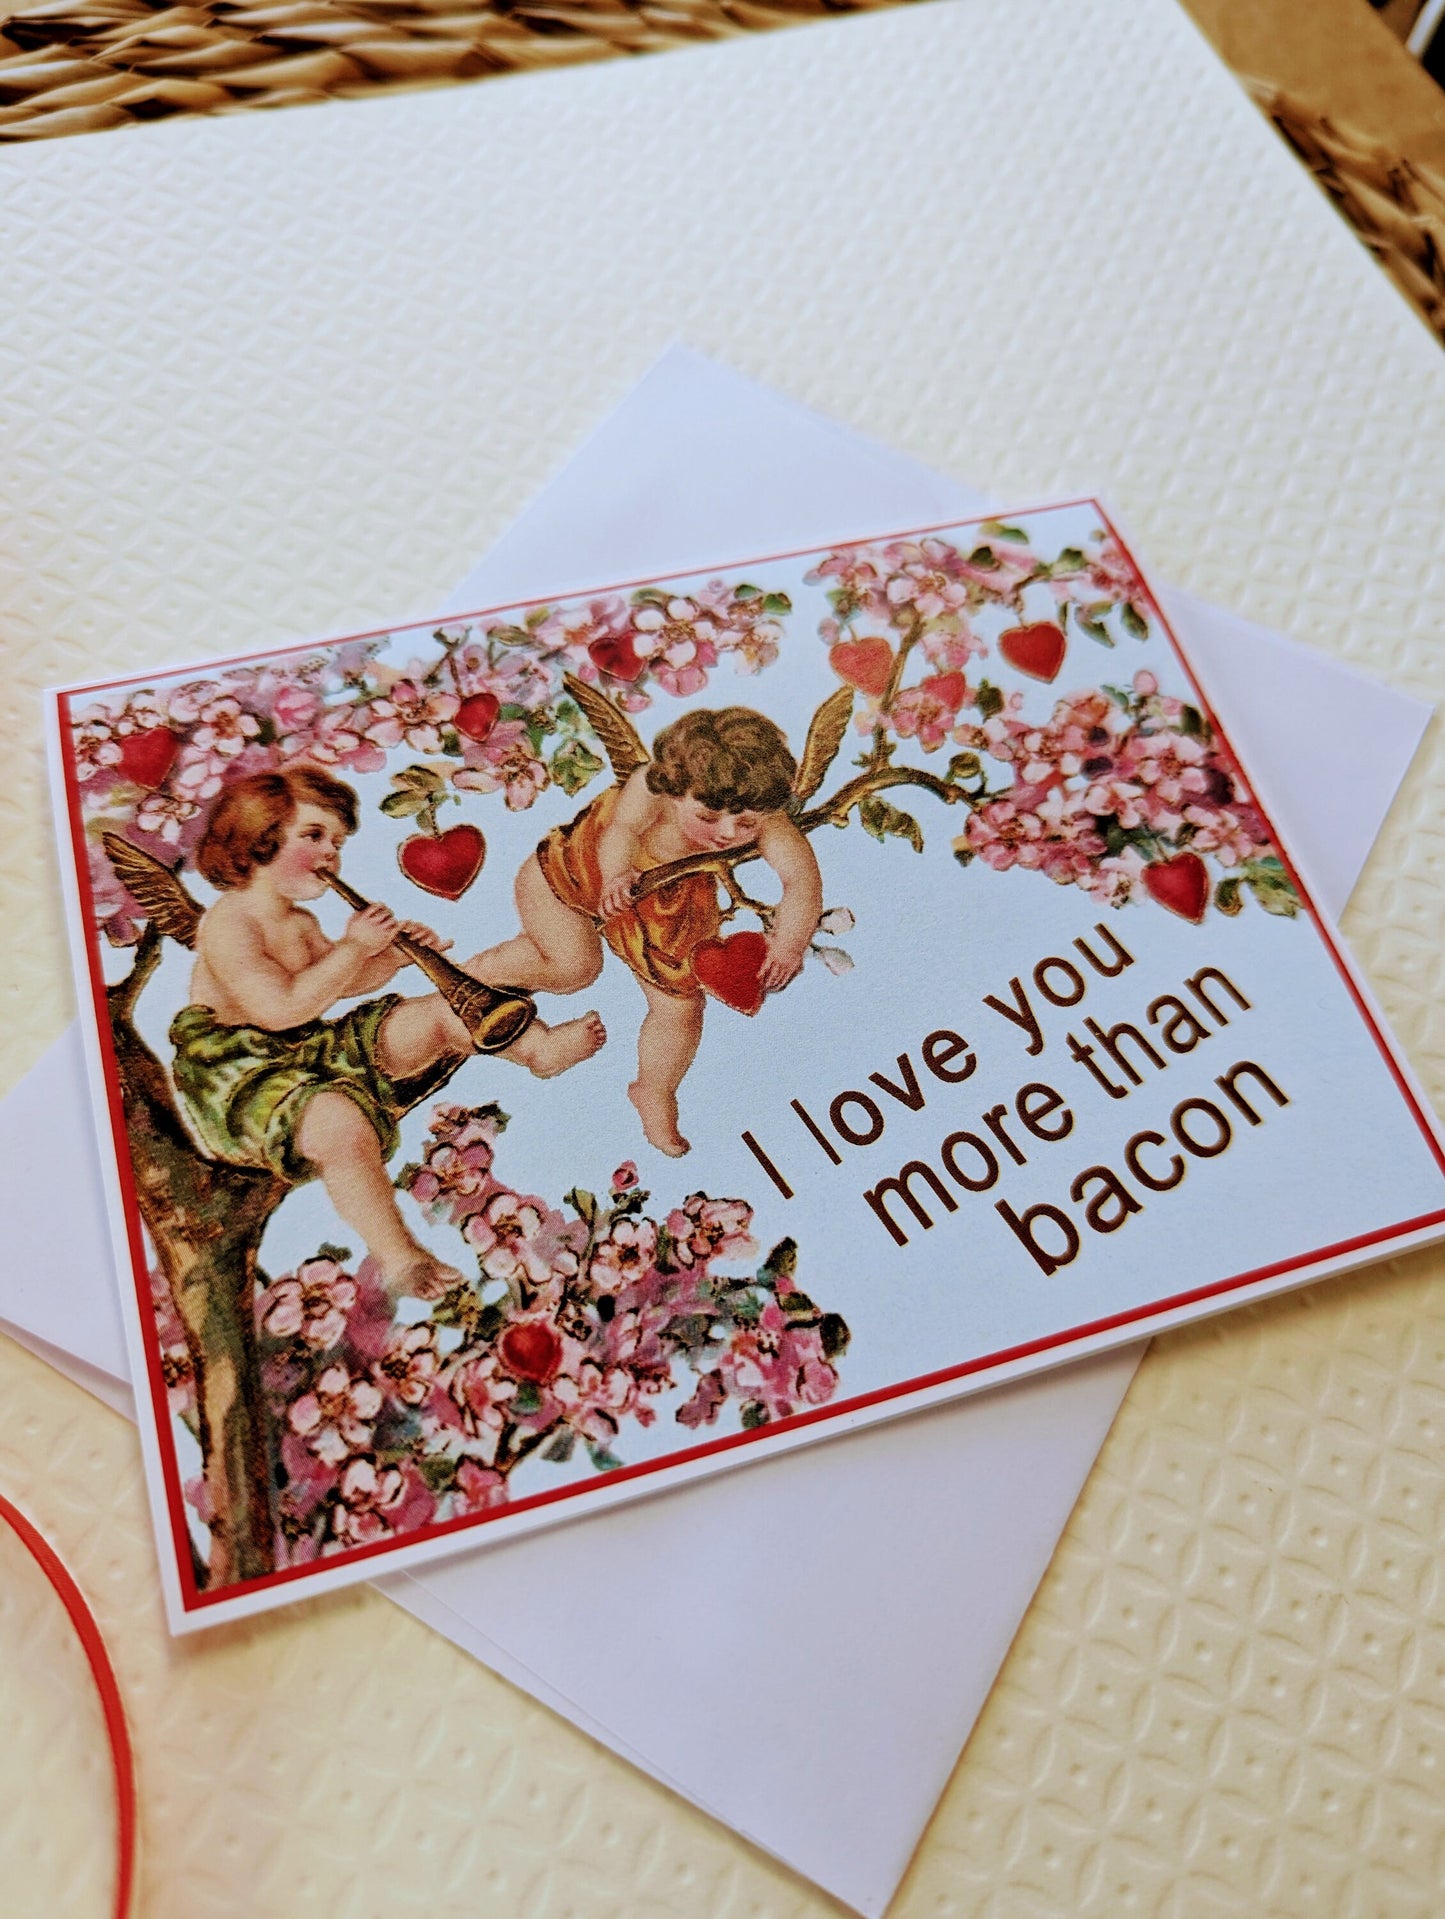 I Love You More Than Bacon - Valentine Card